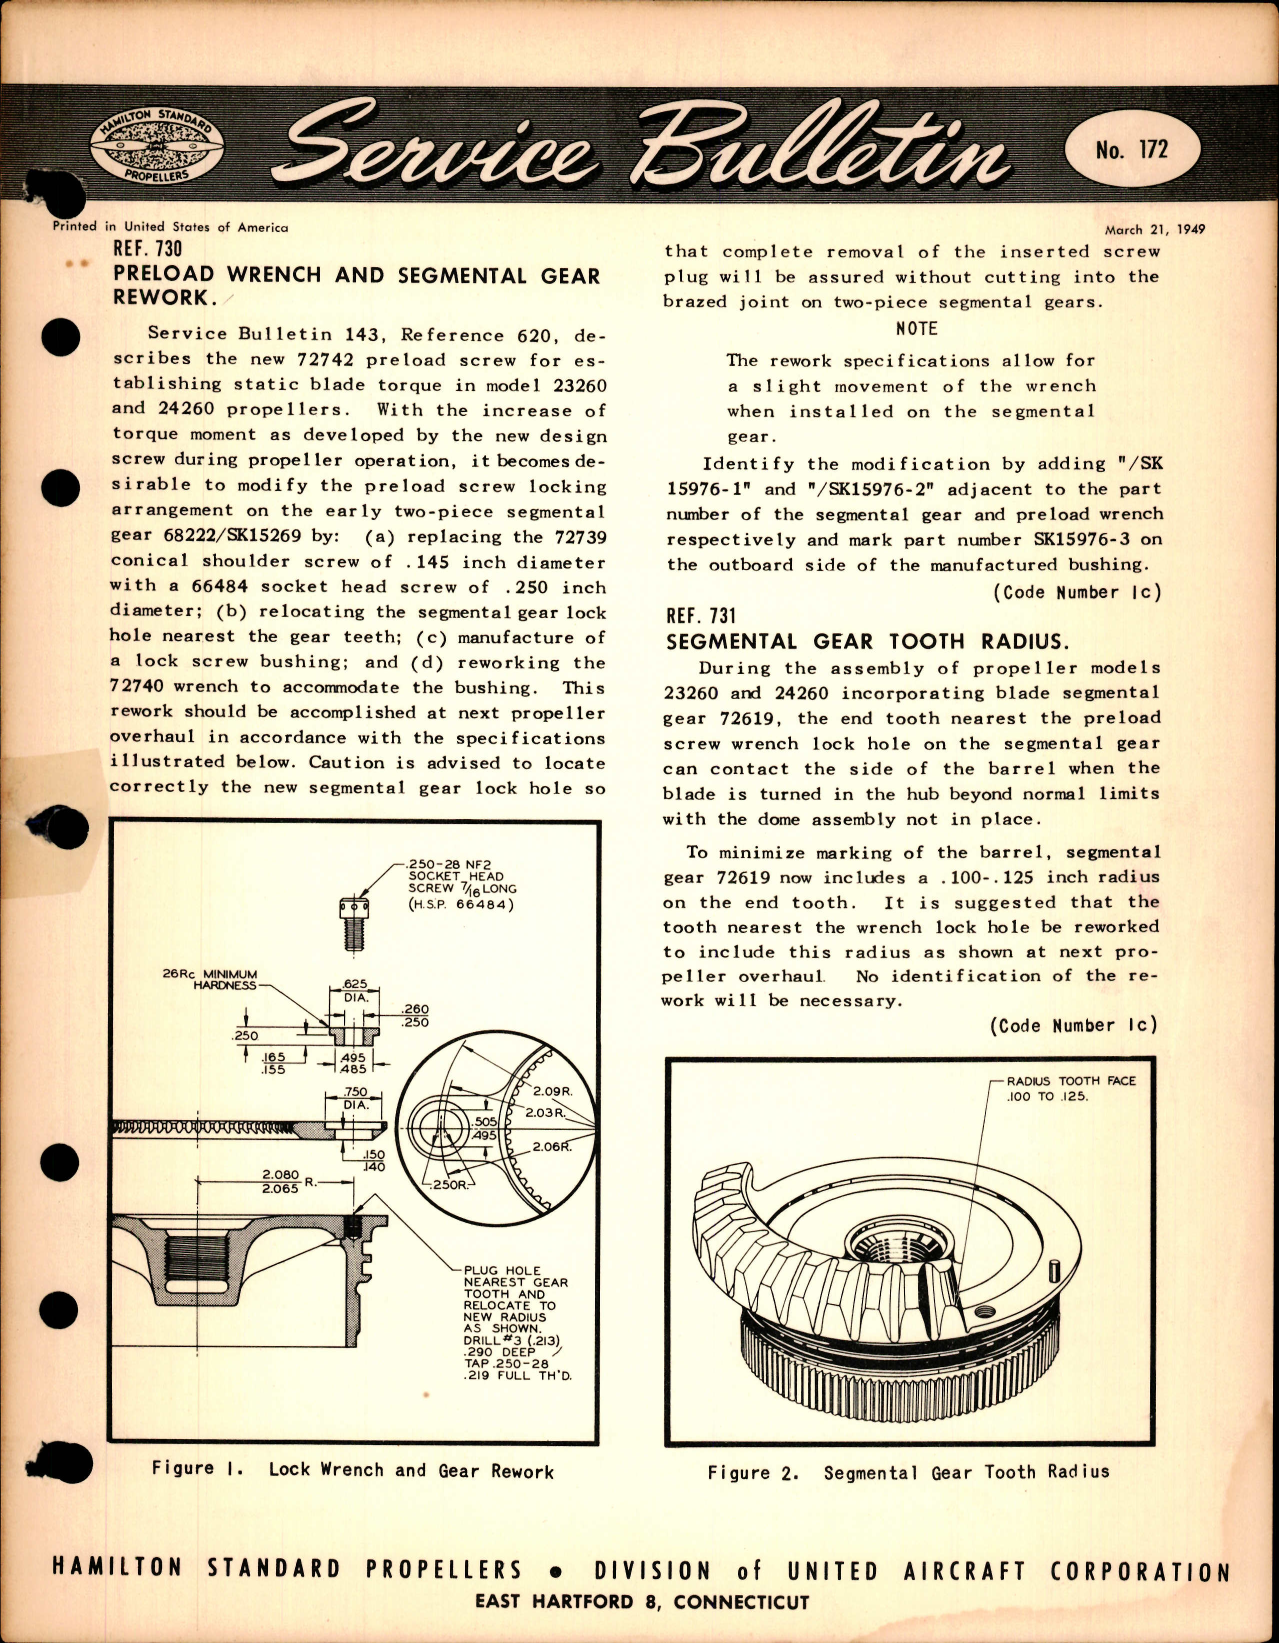 Sample page 1 from AirCorps Library document: Preload Wrench and Segmental Gear Rework, Ref 730